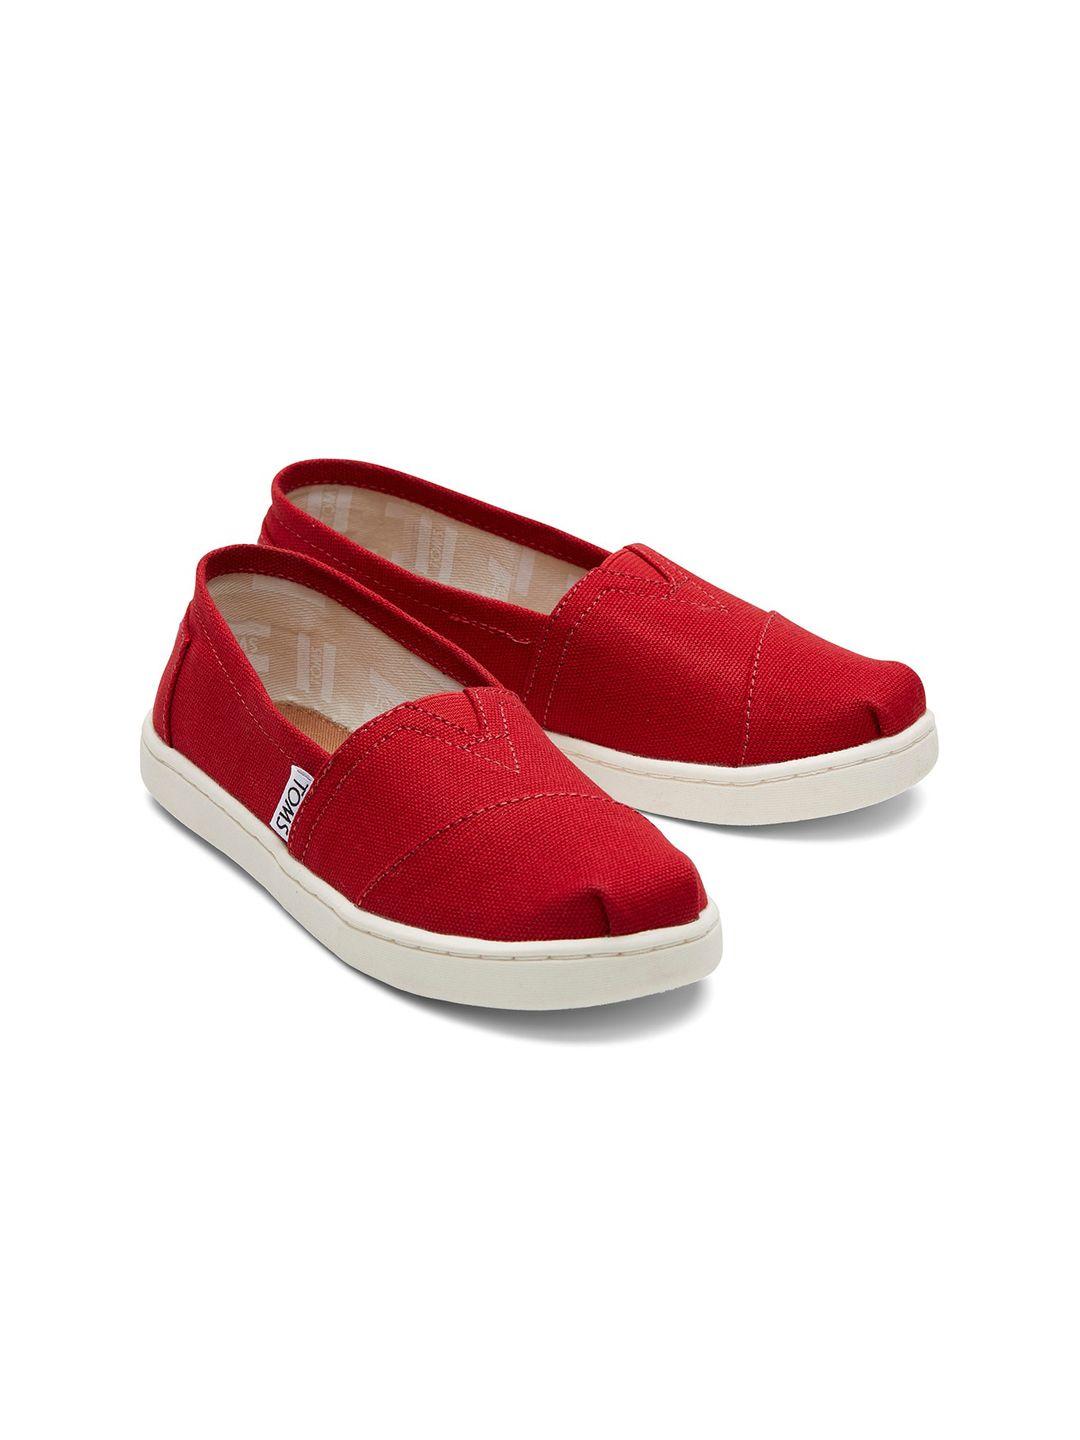 toms boys slip-on casual sneakers